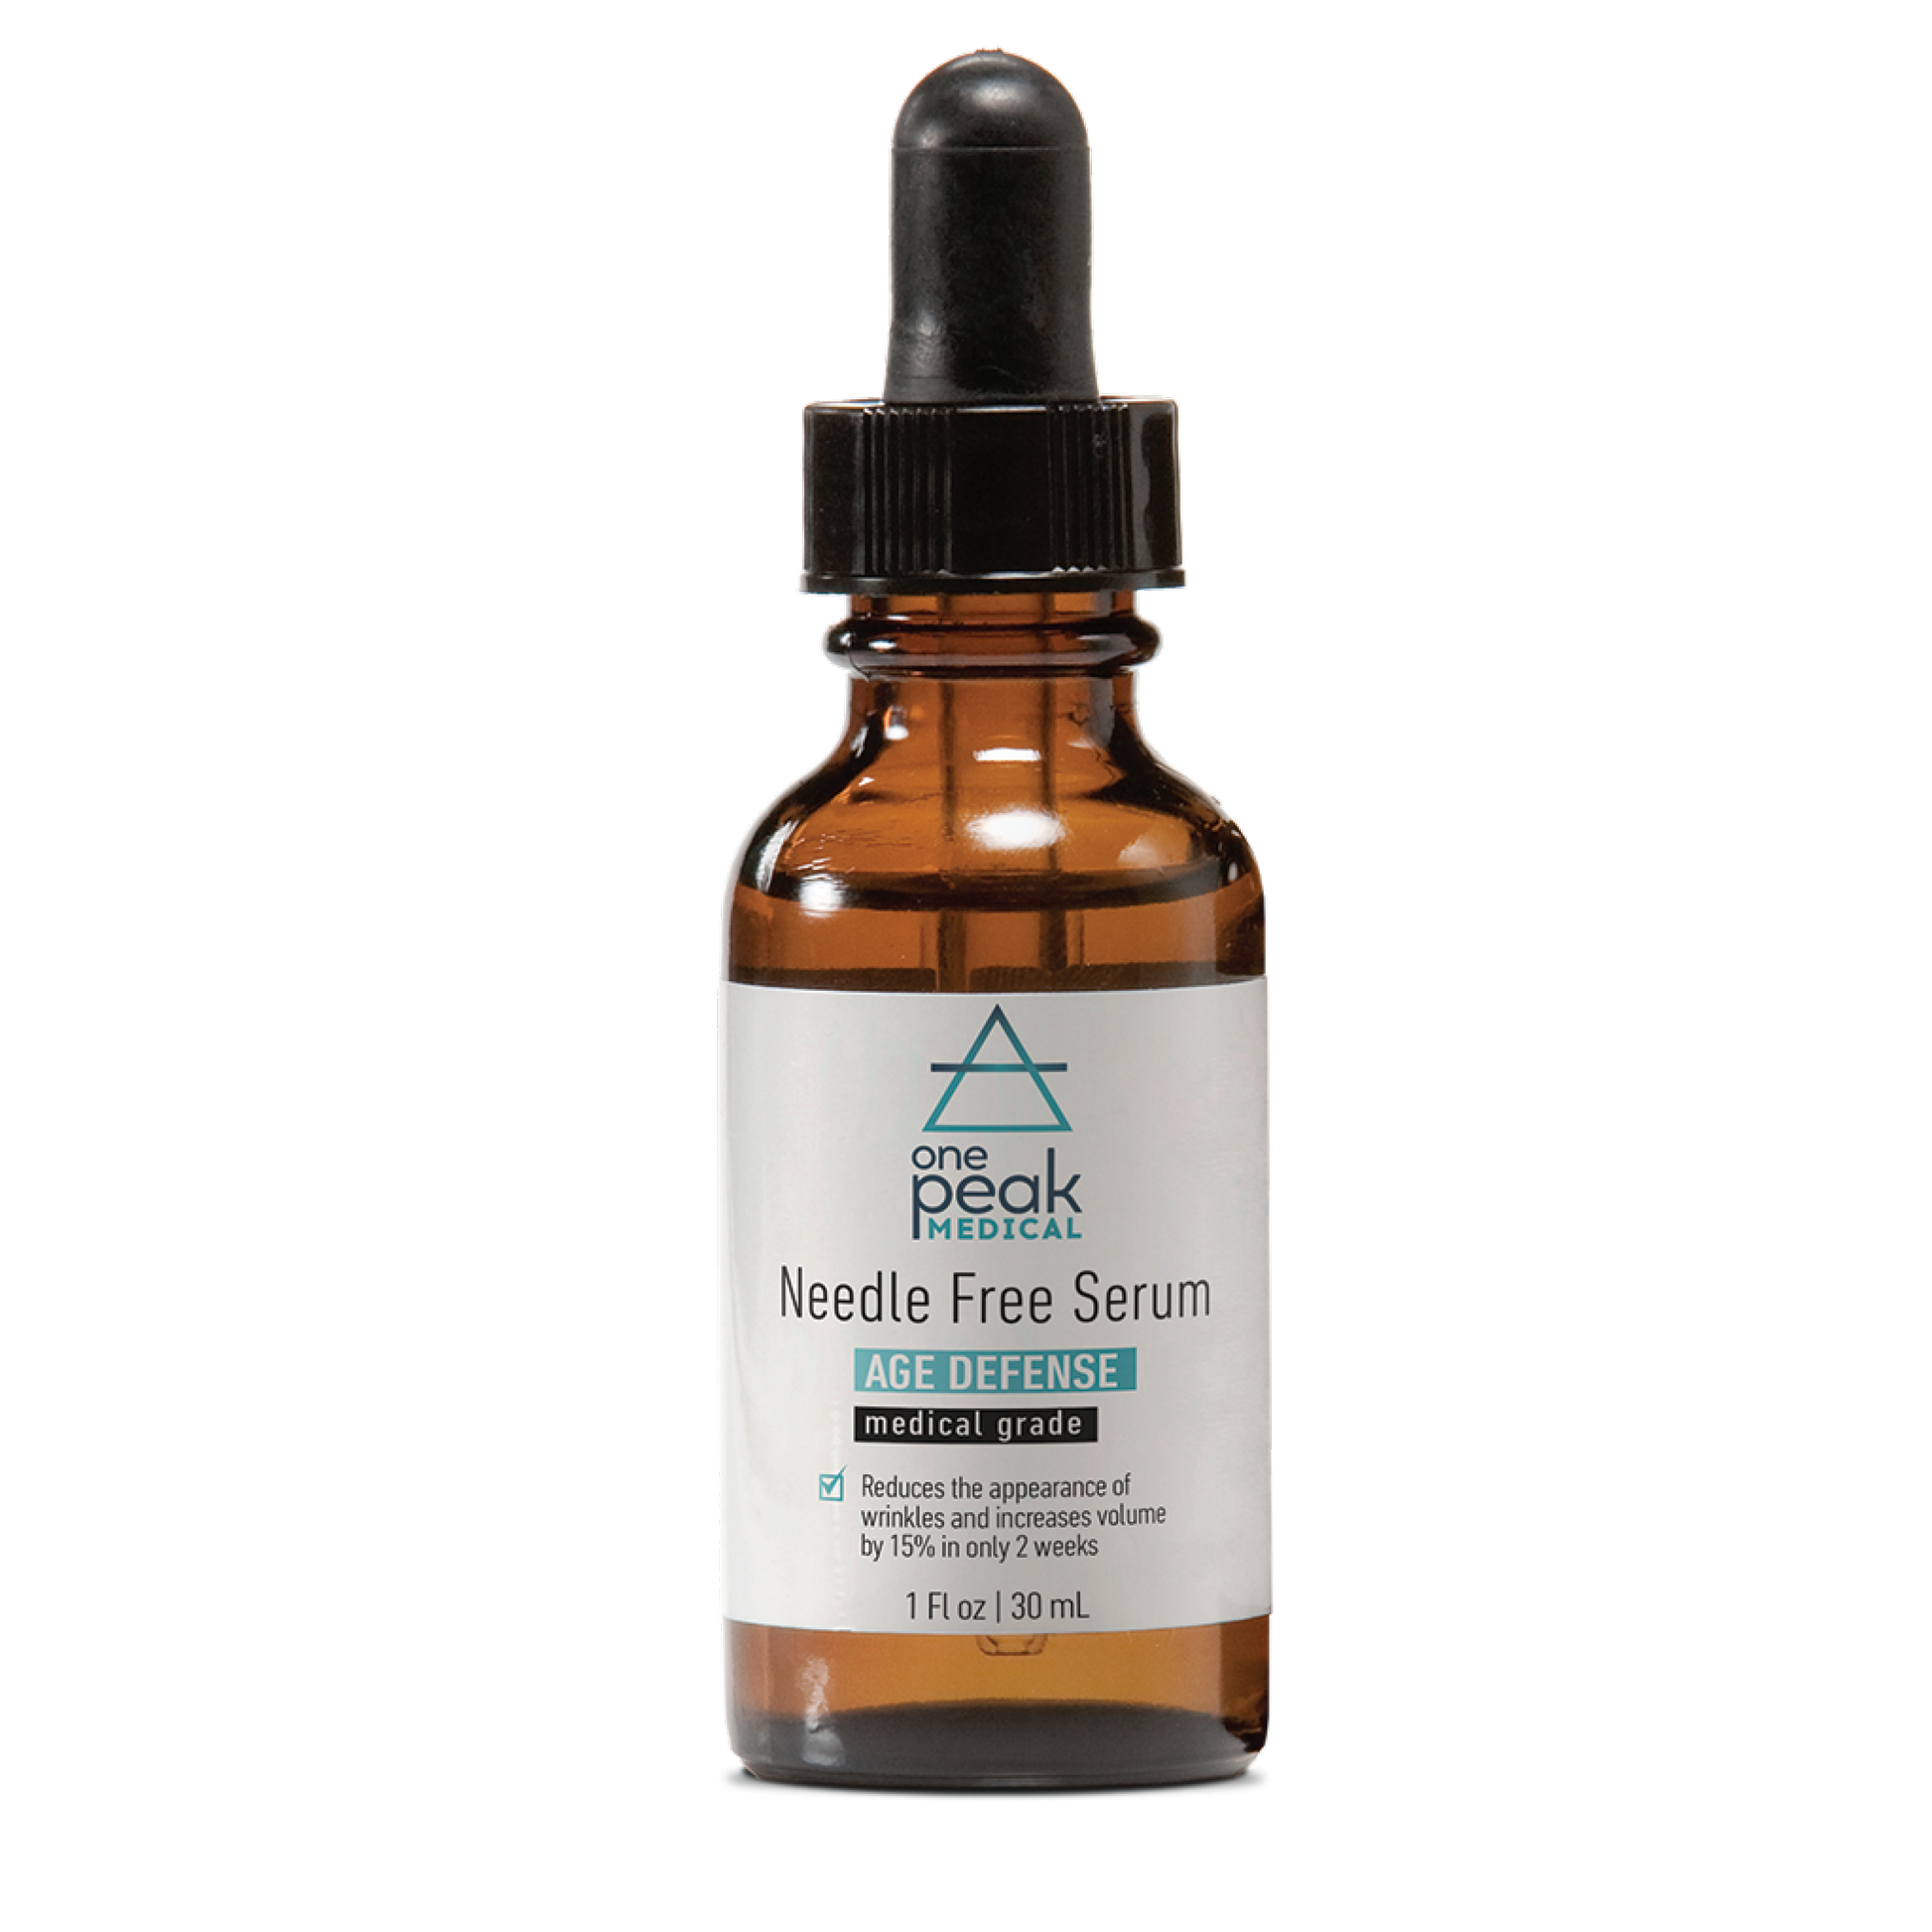 OnePeak Medical - Needle free serum brown bottle with white label